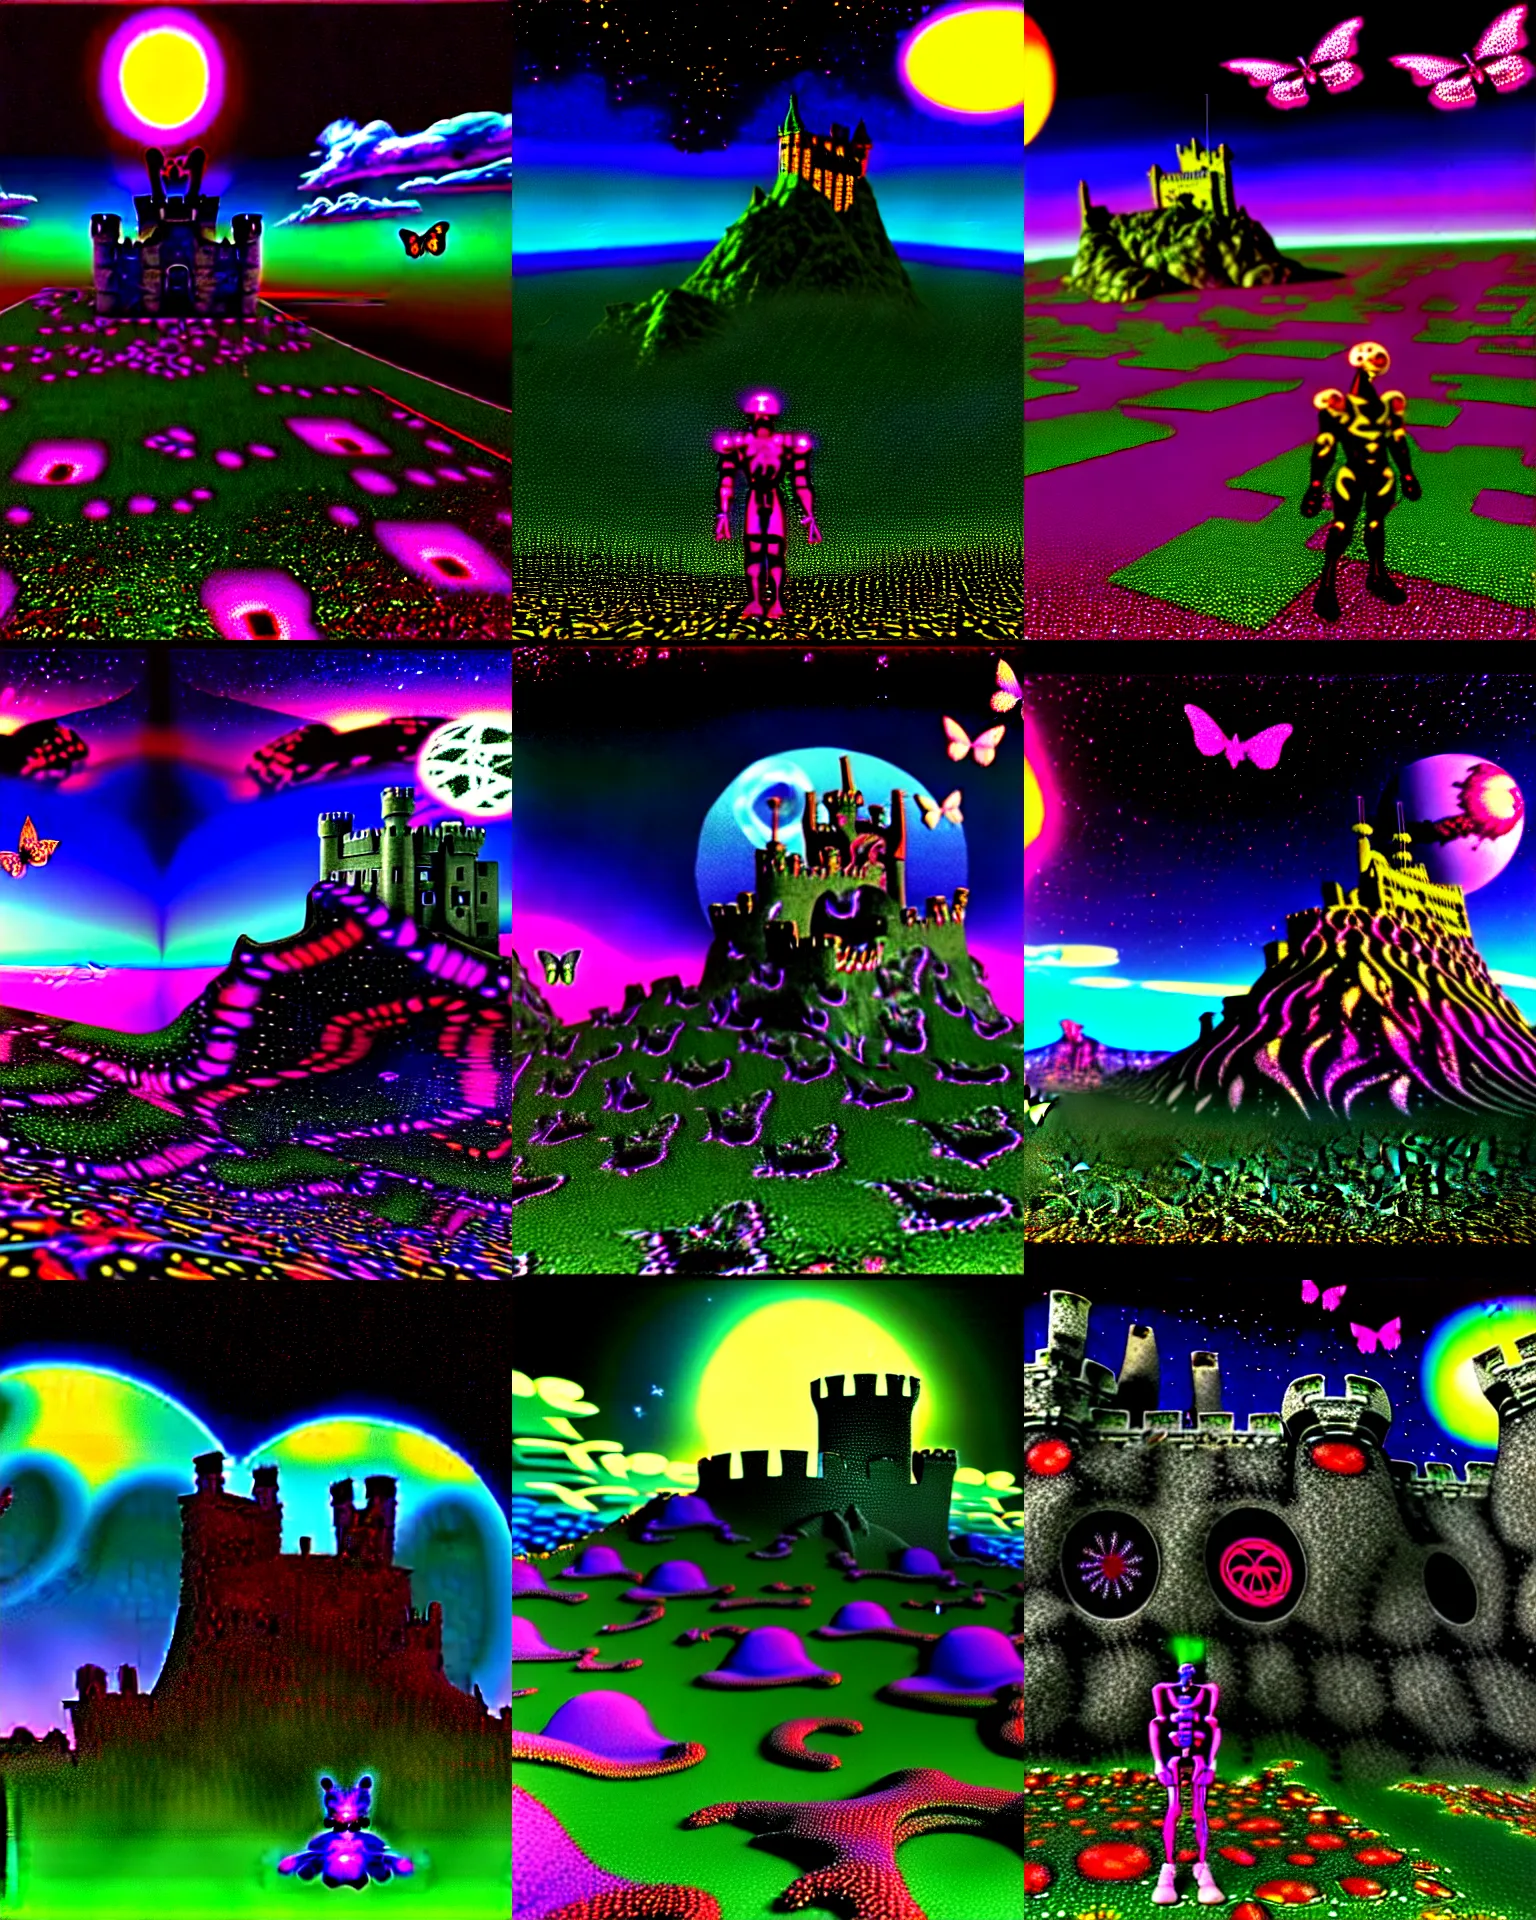 Prompt: 3 d render of cyborg demon standing in cybernetic mountain landscape with castle ruins against a psychedelic surreal background with 3 d butterflies and 3 d flowers n the style of 1 9 9 0's cg graphics against the cloudy night sky, lsd dream emulator psx, 3 d rendered y 2 k aesthetic by ichiro tanida, 3 do magazine, wide shot